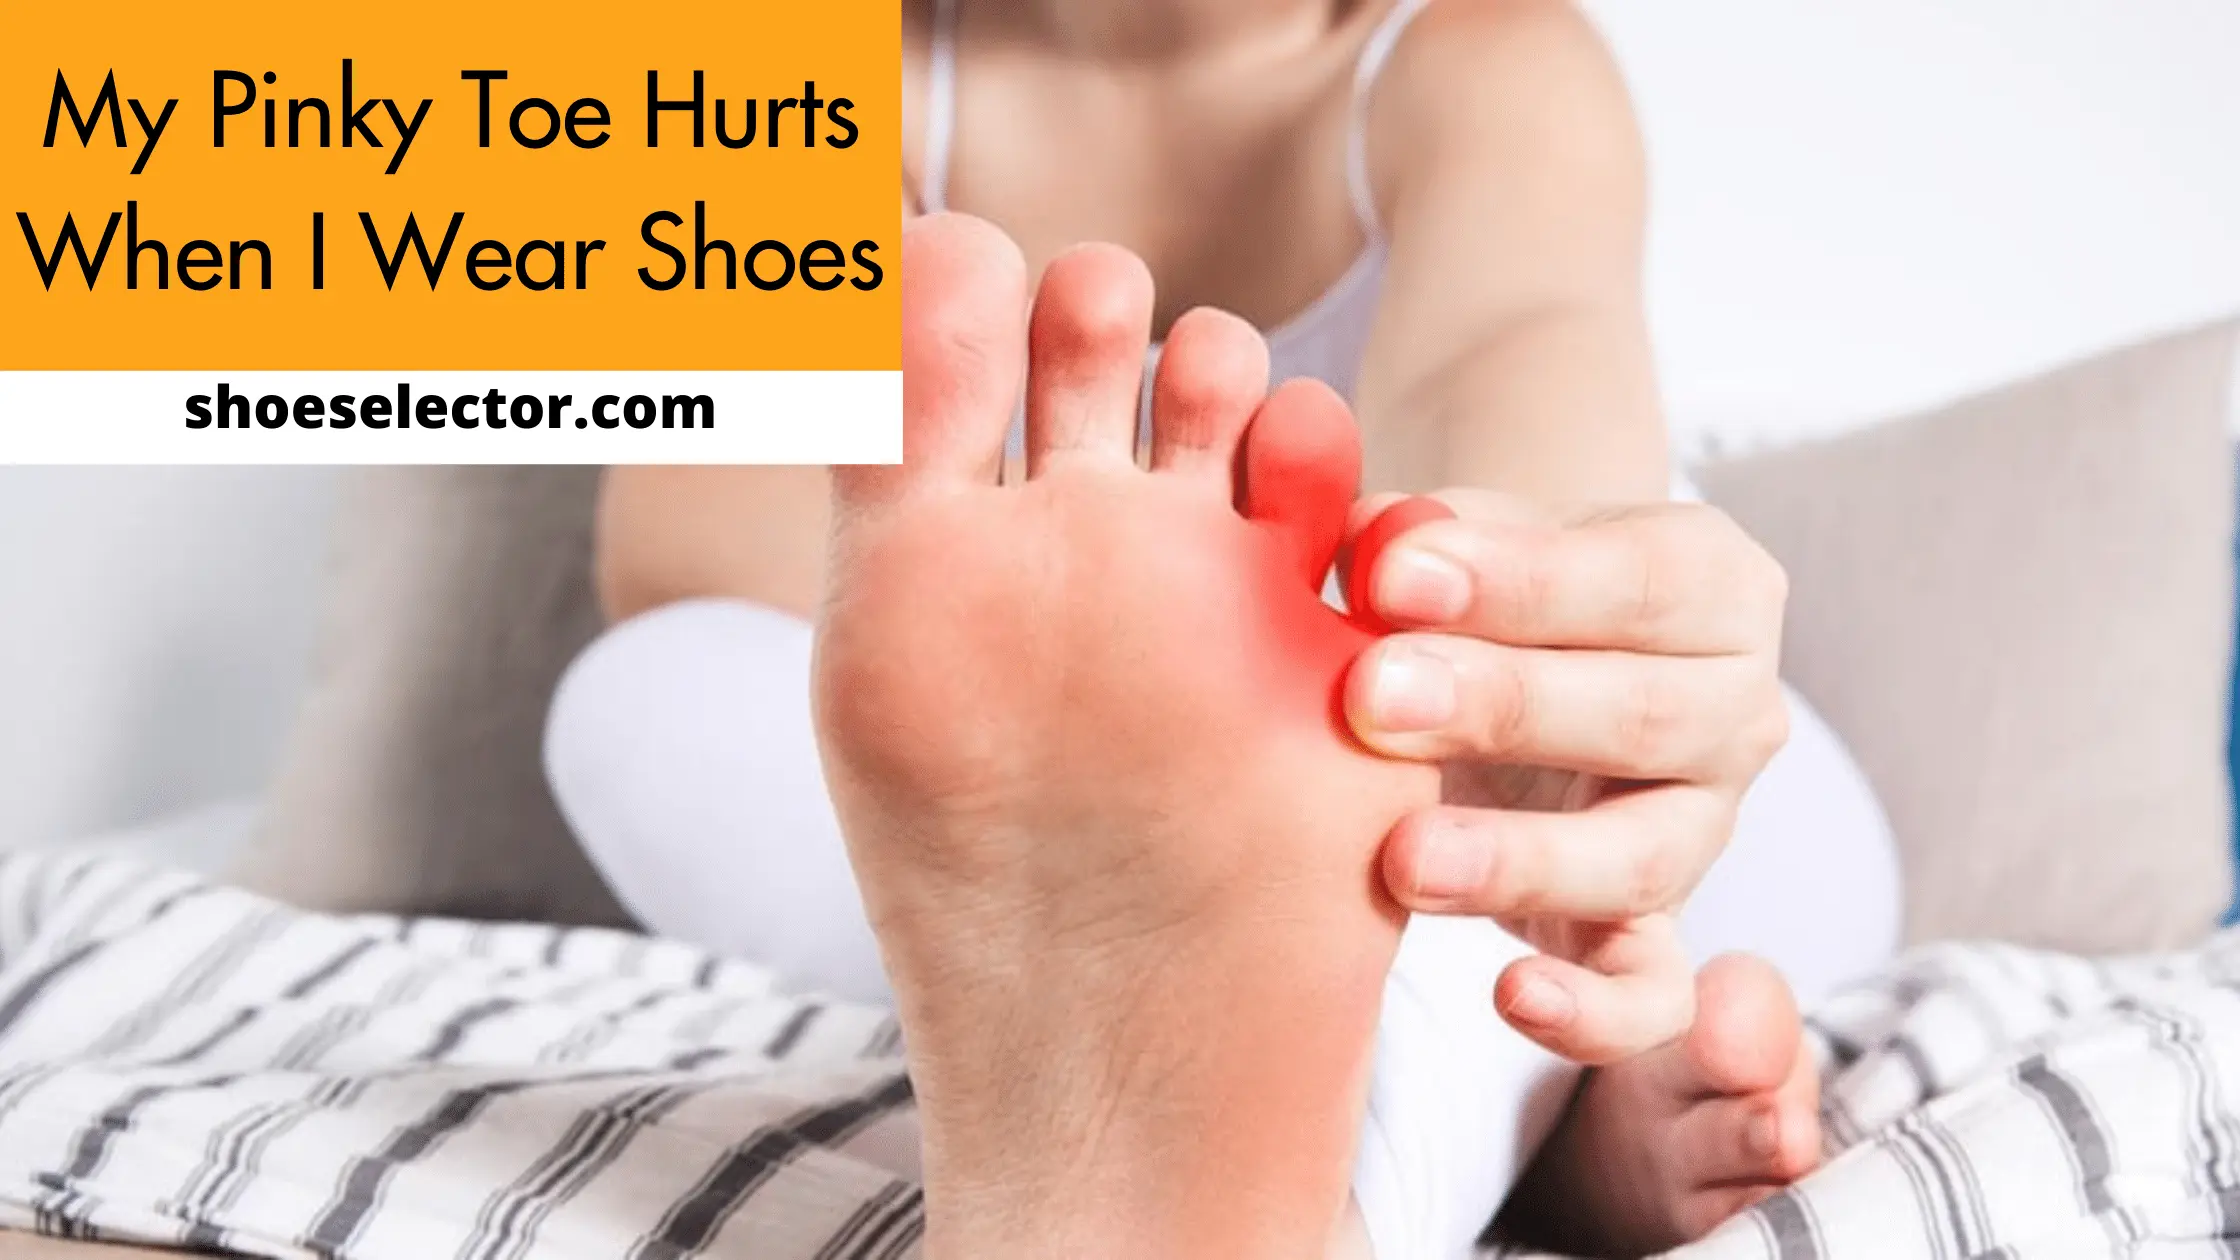 My Pinky Toe Hurts When I Wear Shoes - #1 Solution